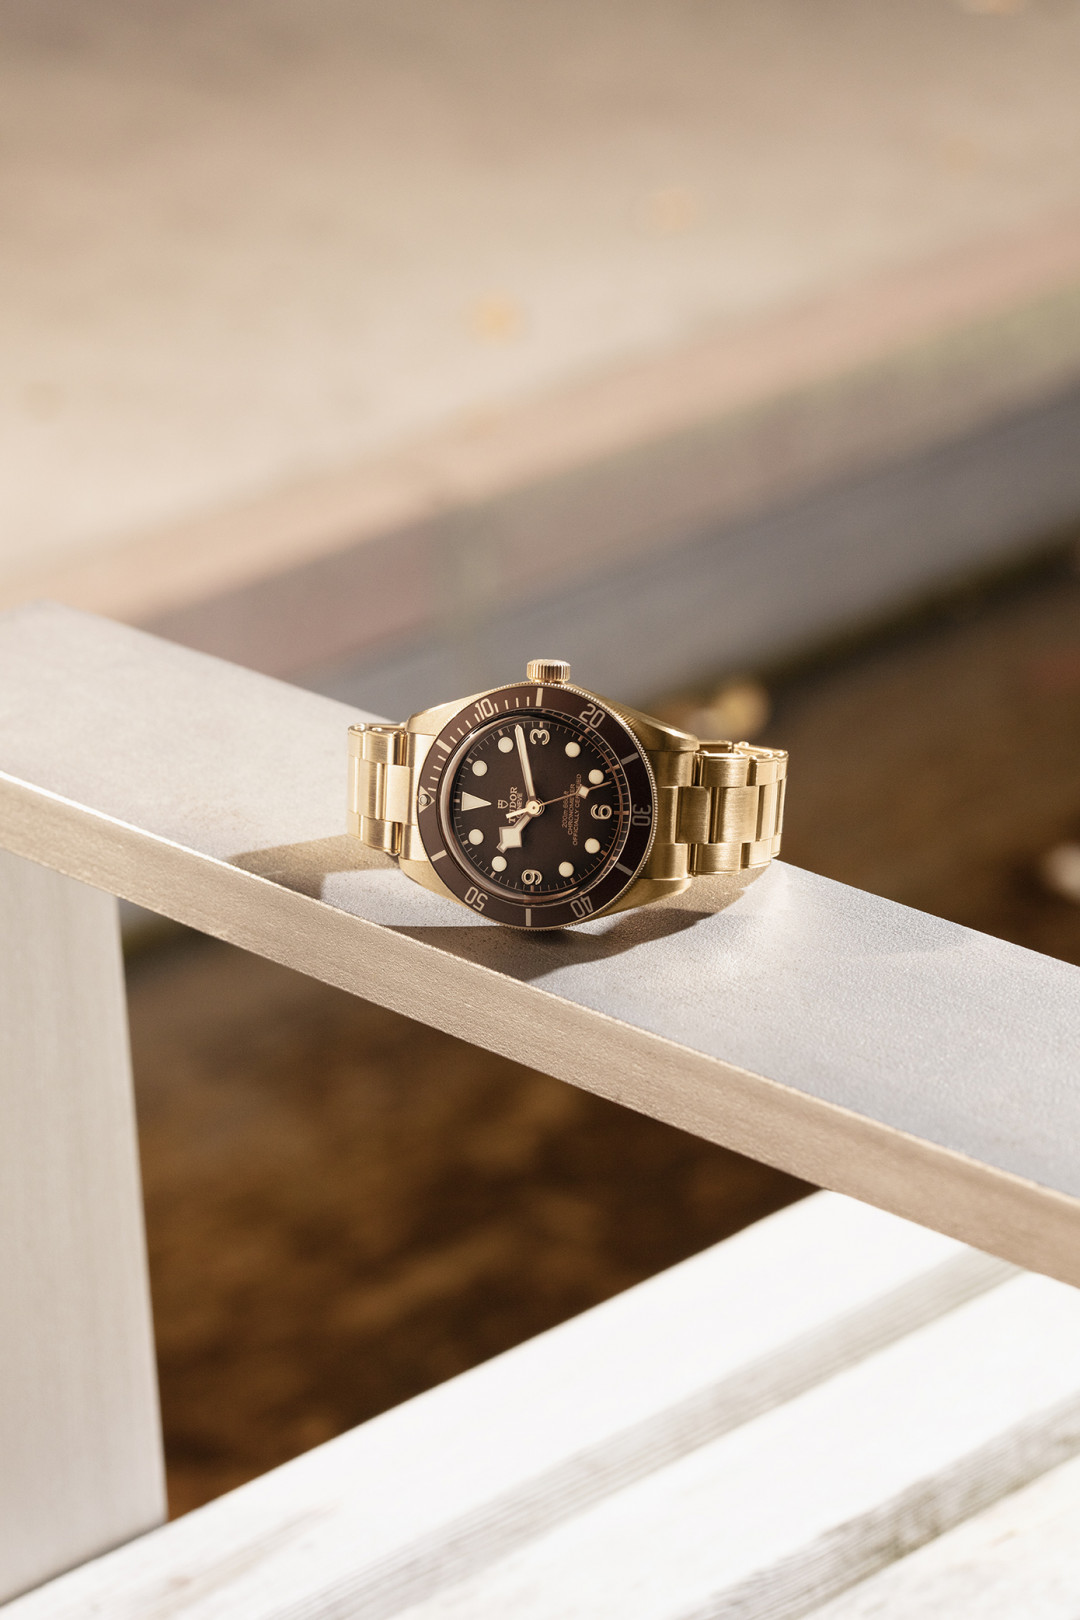 BLACK BAY FIFTY-EIGHT BRONZE BOUTIQUE EDITION (REFERENCE 79012M)